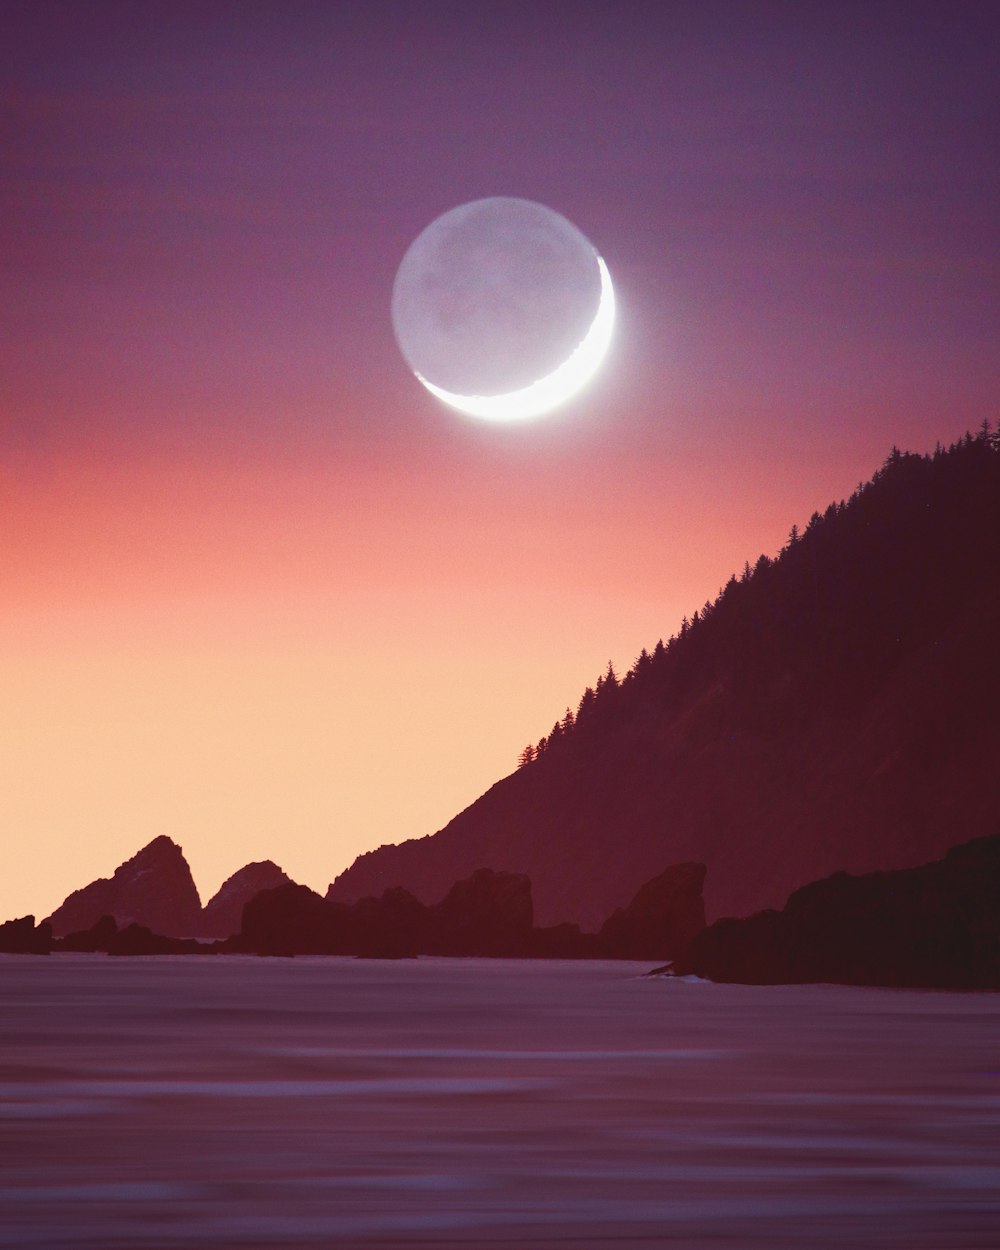 a crescent moon is seen over the ocean